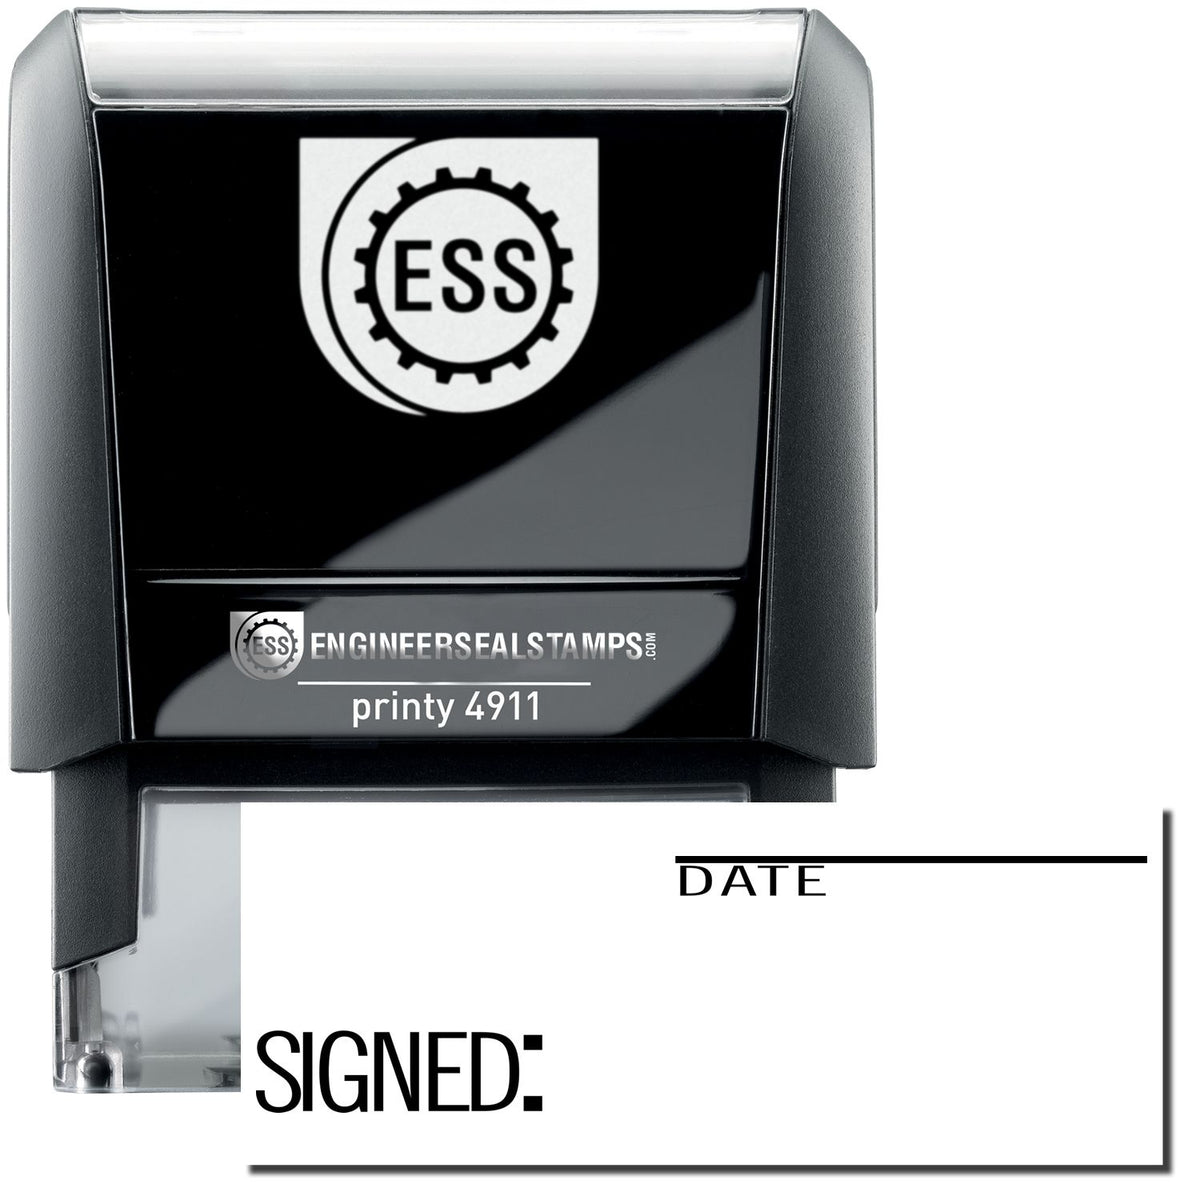 A self-inking stamp with a stamped image showing how the text &quot;SIGNED:&quot; in the left down position and &quot;DATE&quot; in the right top position (with a line above it) is displayed after stamping.